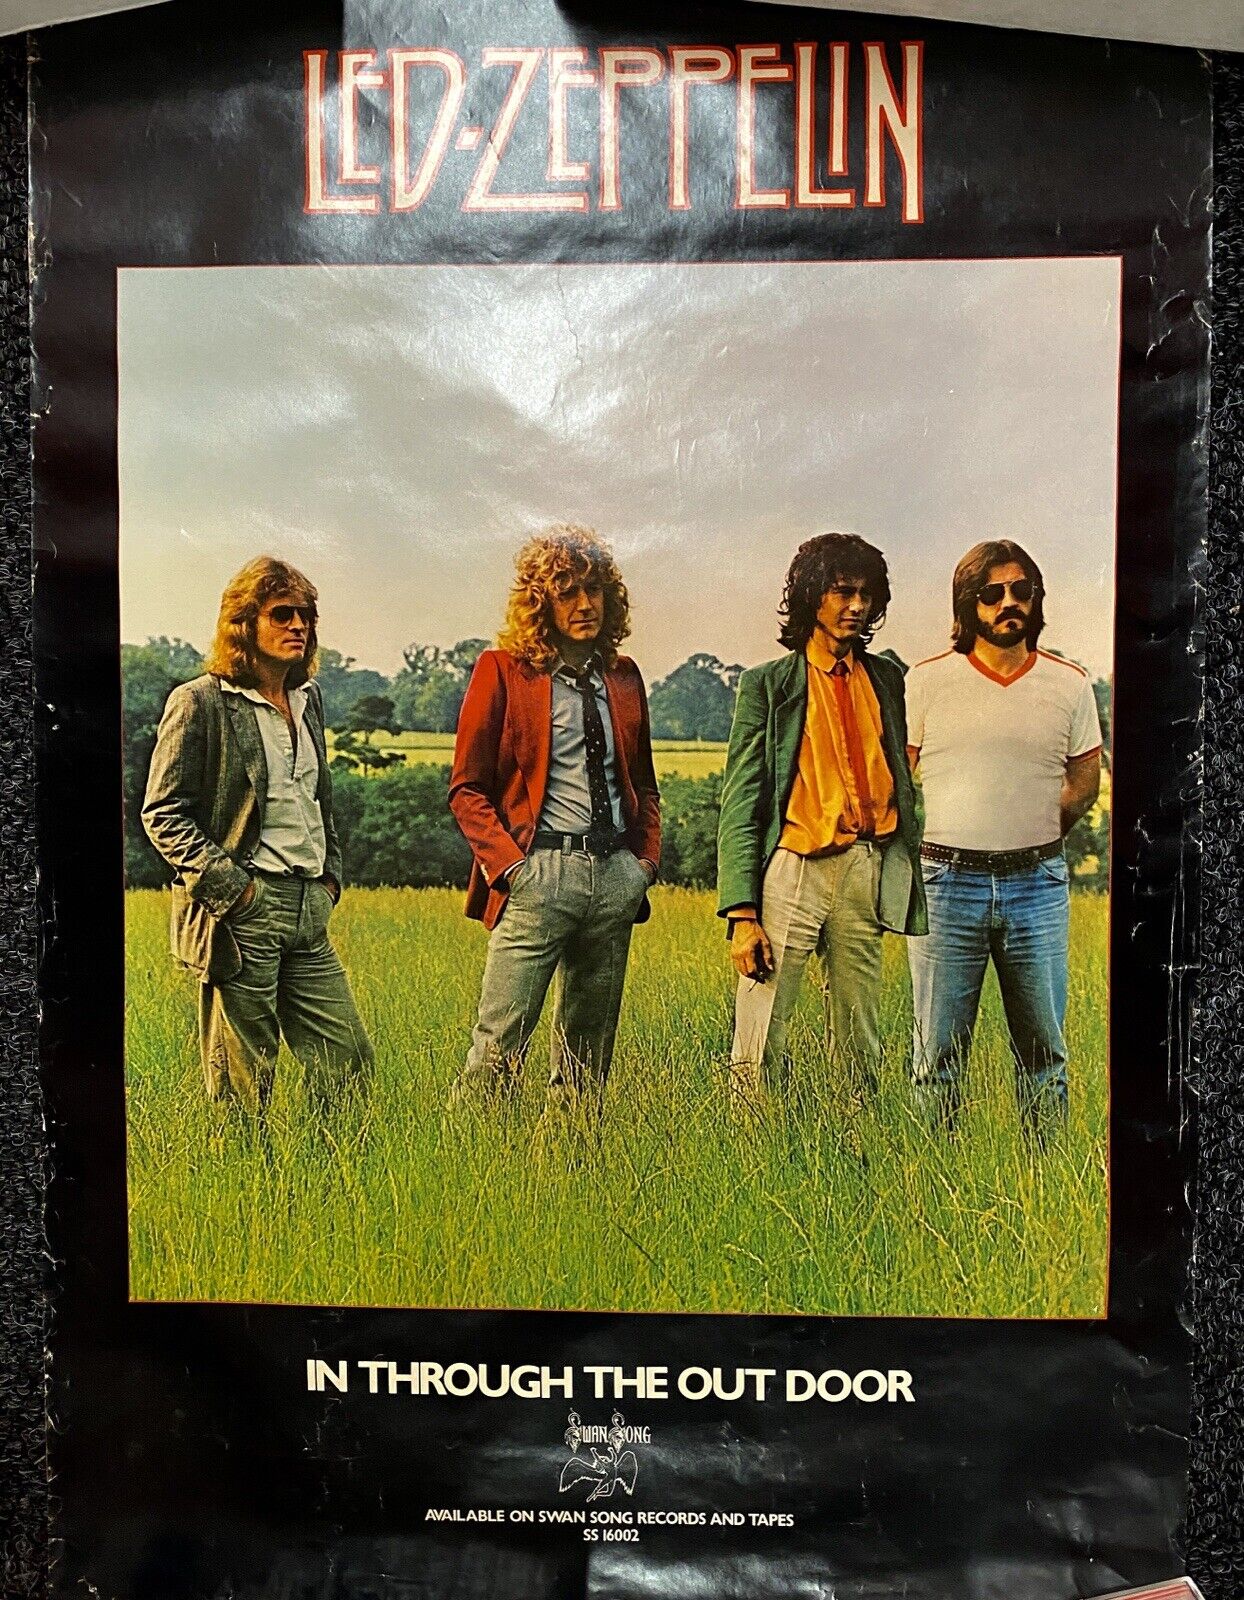 Led Zeppelin - In Through The Out Door - Promo Poster - Swan Song Records - 1978